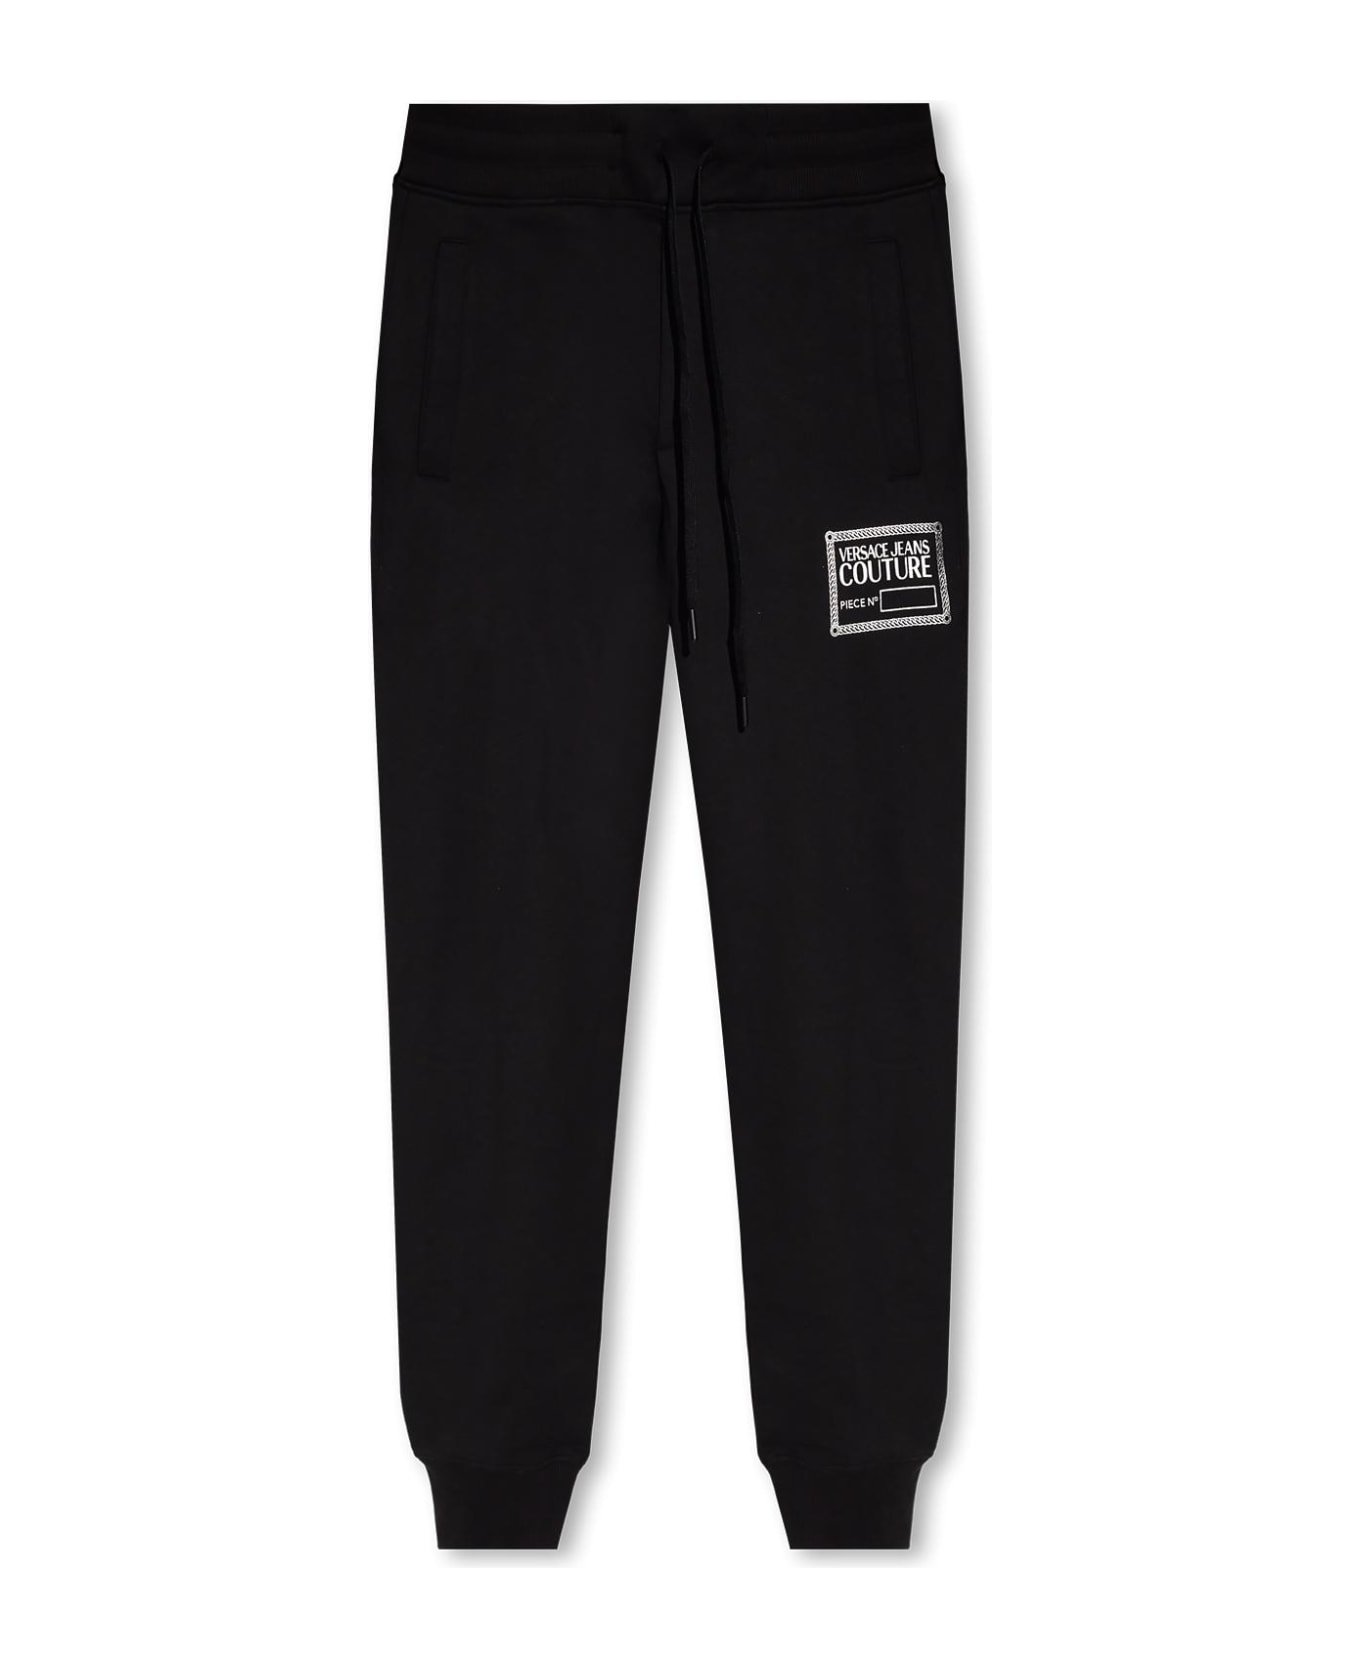 Versace Jeans Couture Jogging Trousers - Nero/argento スウェットパンツ